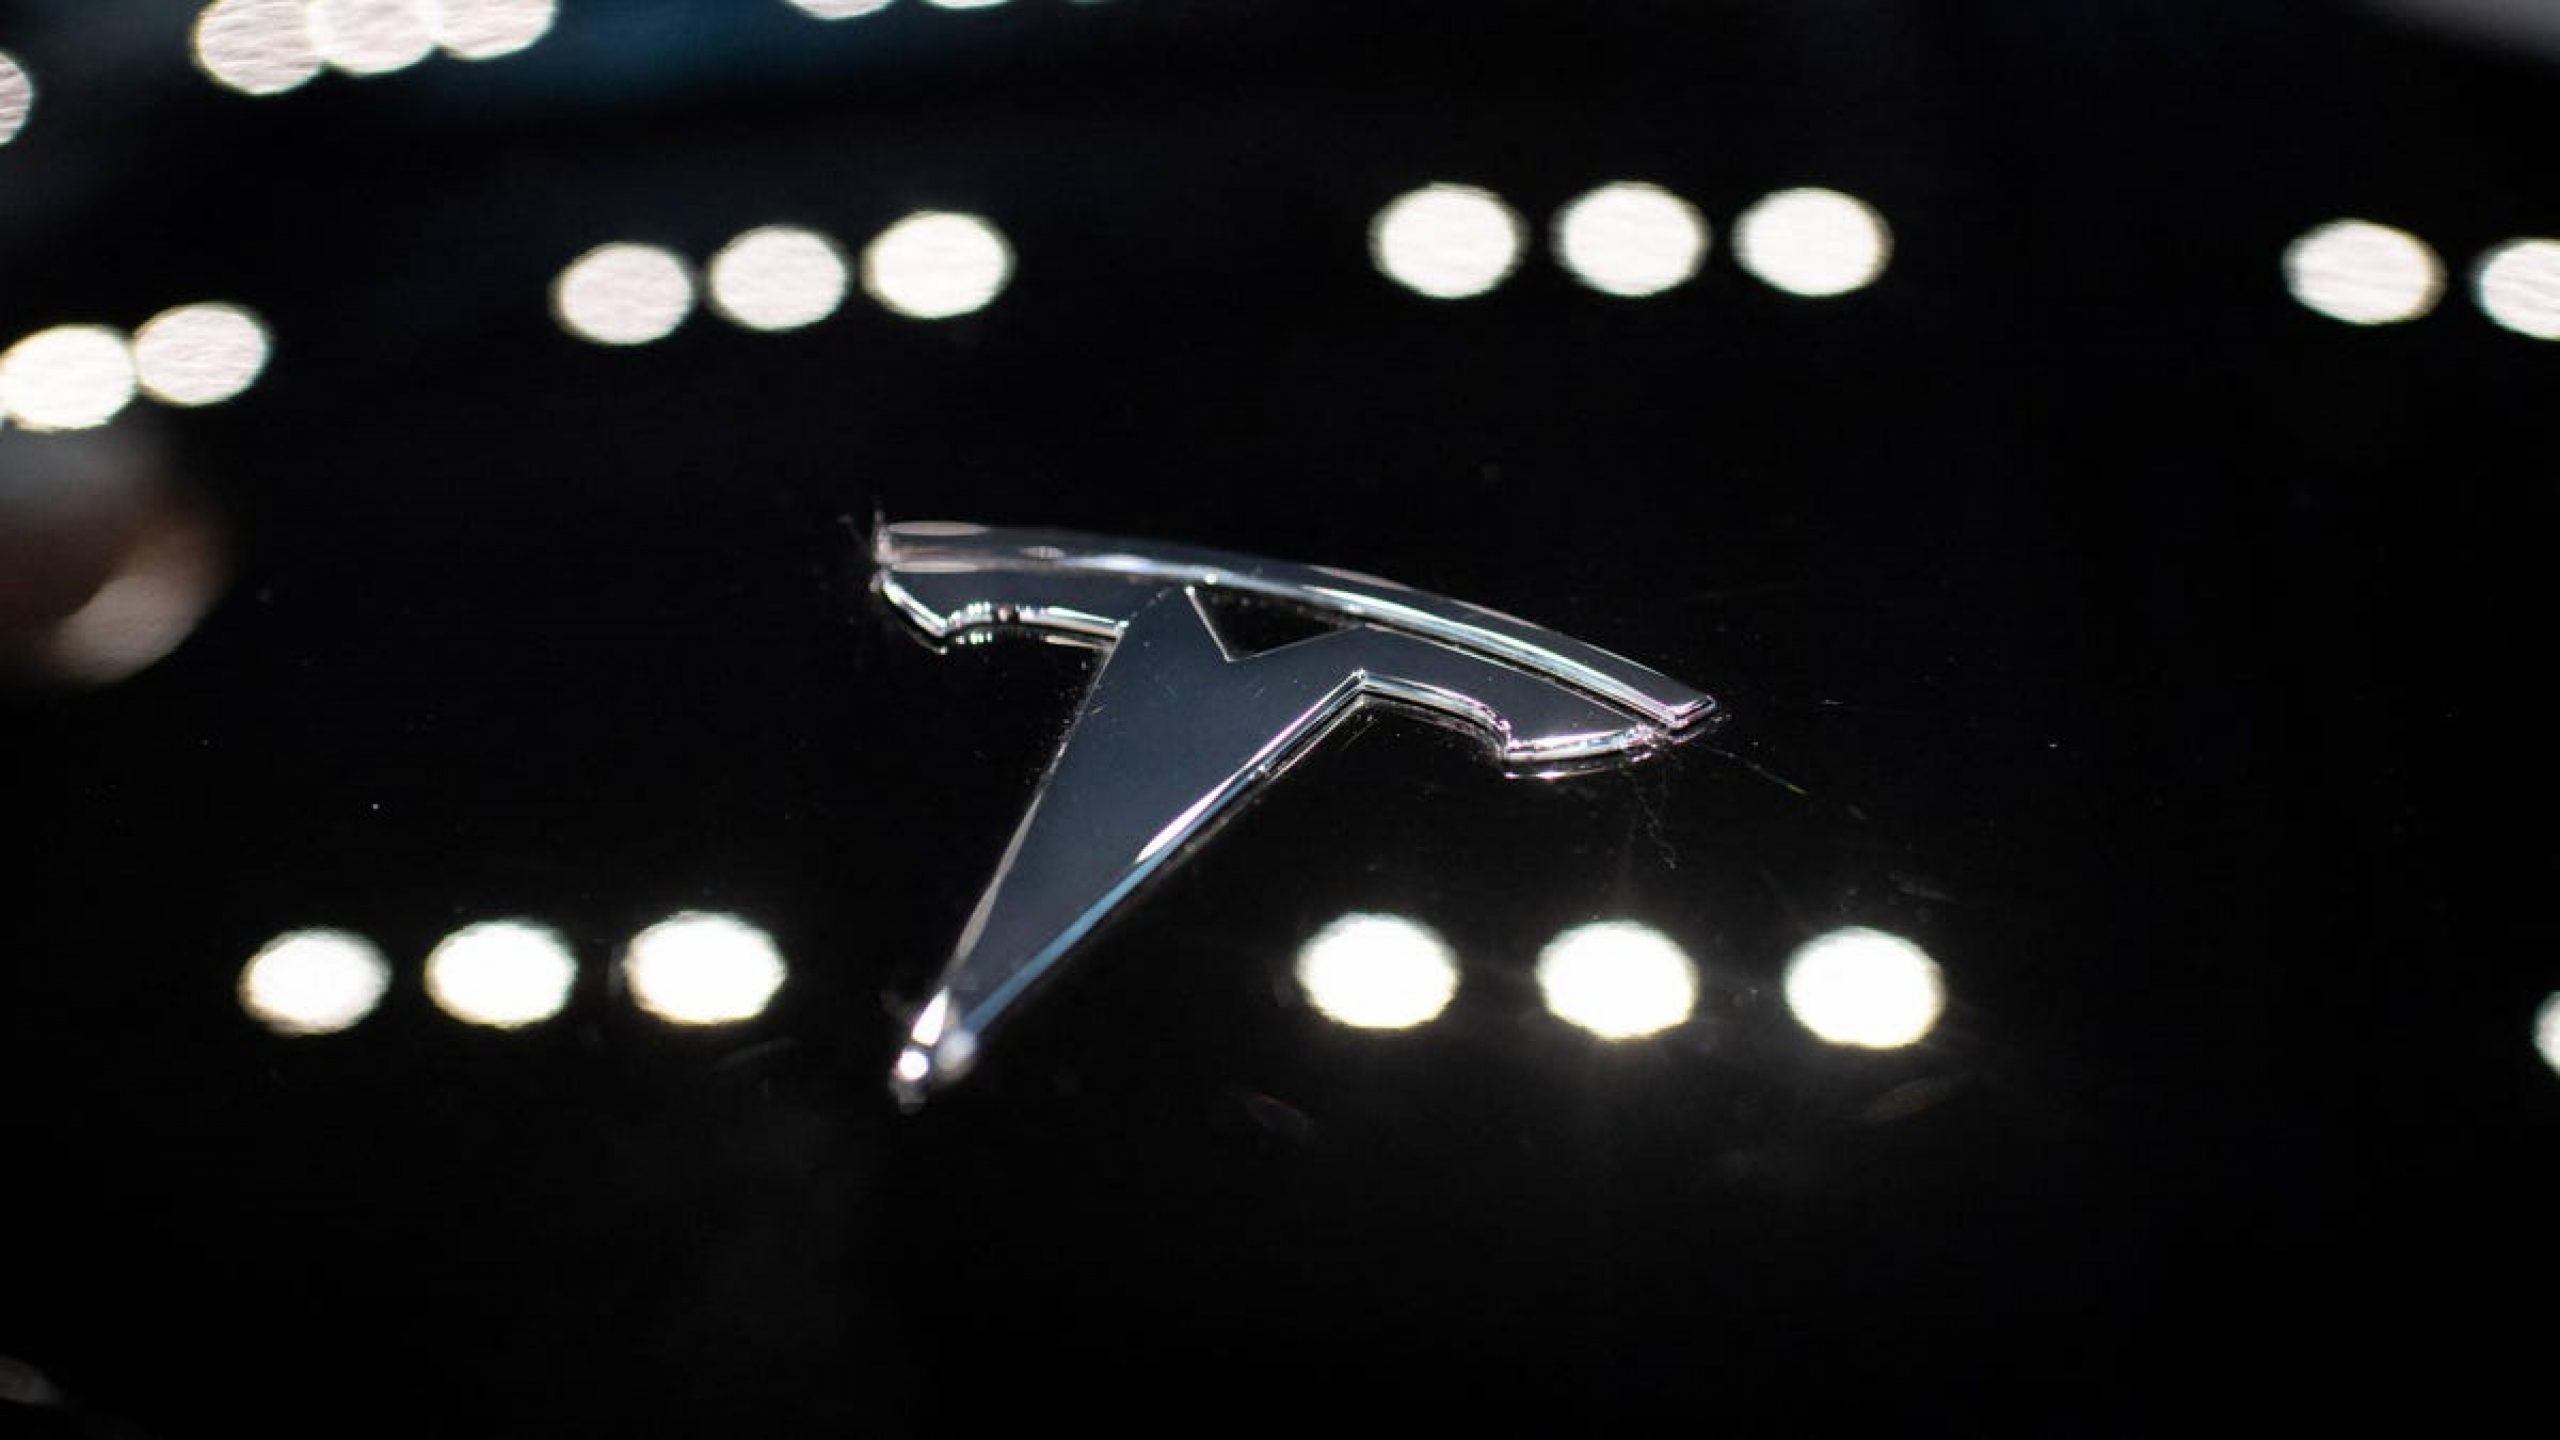 Tesla Recalls Nearly 300,000 Cars in China Over Cruise Control Safety Issues